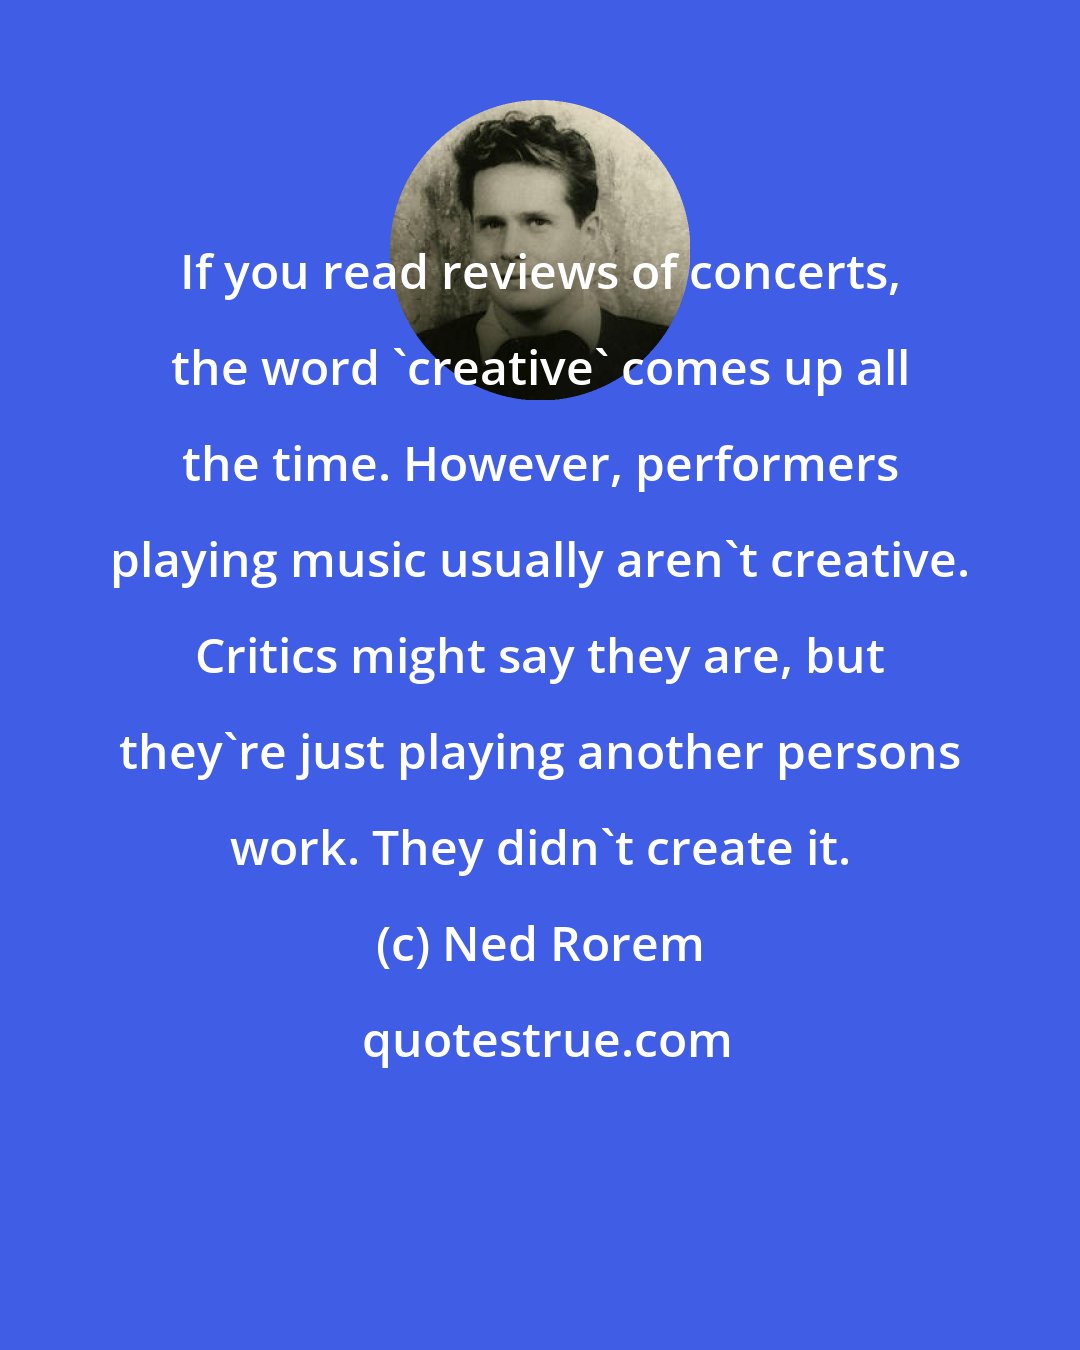 Ned Rorem: If you read reviews of concerts, the word 'creative' comes up all the time. However, performers playing music usually aren't creative. Critics might say they are, but they're just playing another persons work. They didn't create it.